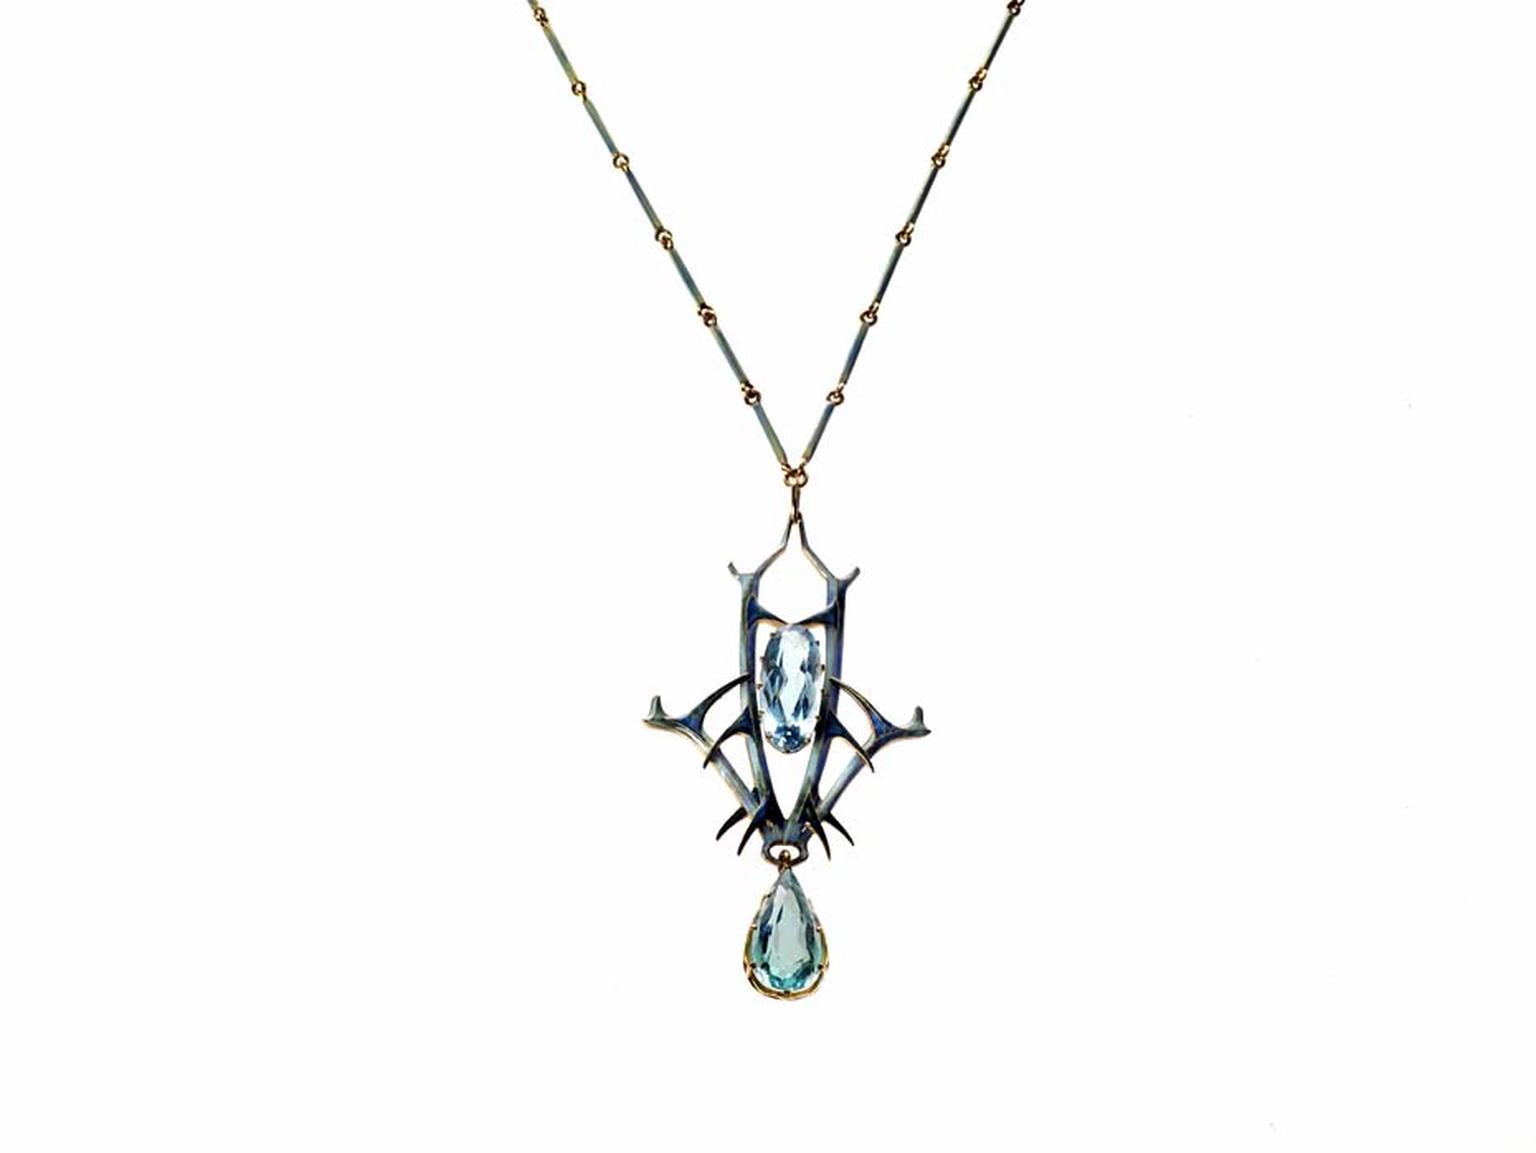 René Lalique made his name as one of France’s foremost Art Nouveau jewellery designers and his jewels often featured aquamarines, such as this aquamarine pendant that was on display as part of the Maker & Muse exhibition at the Driehaus Museum in